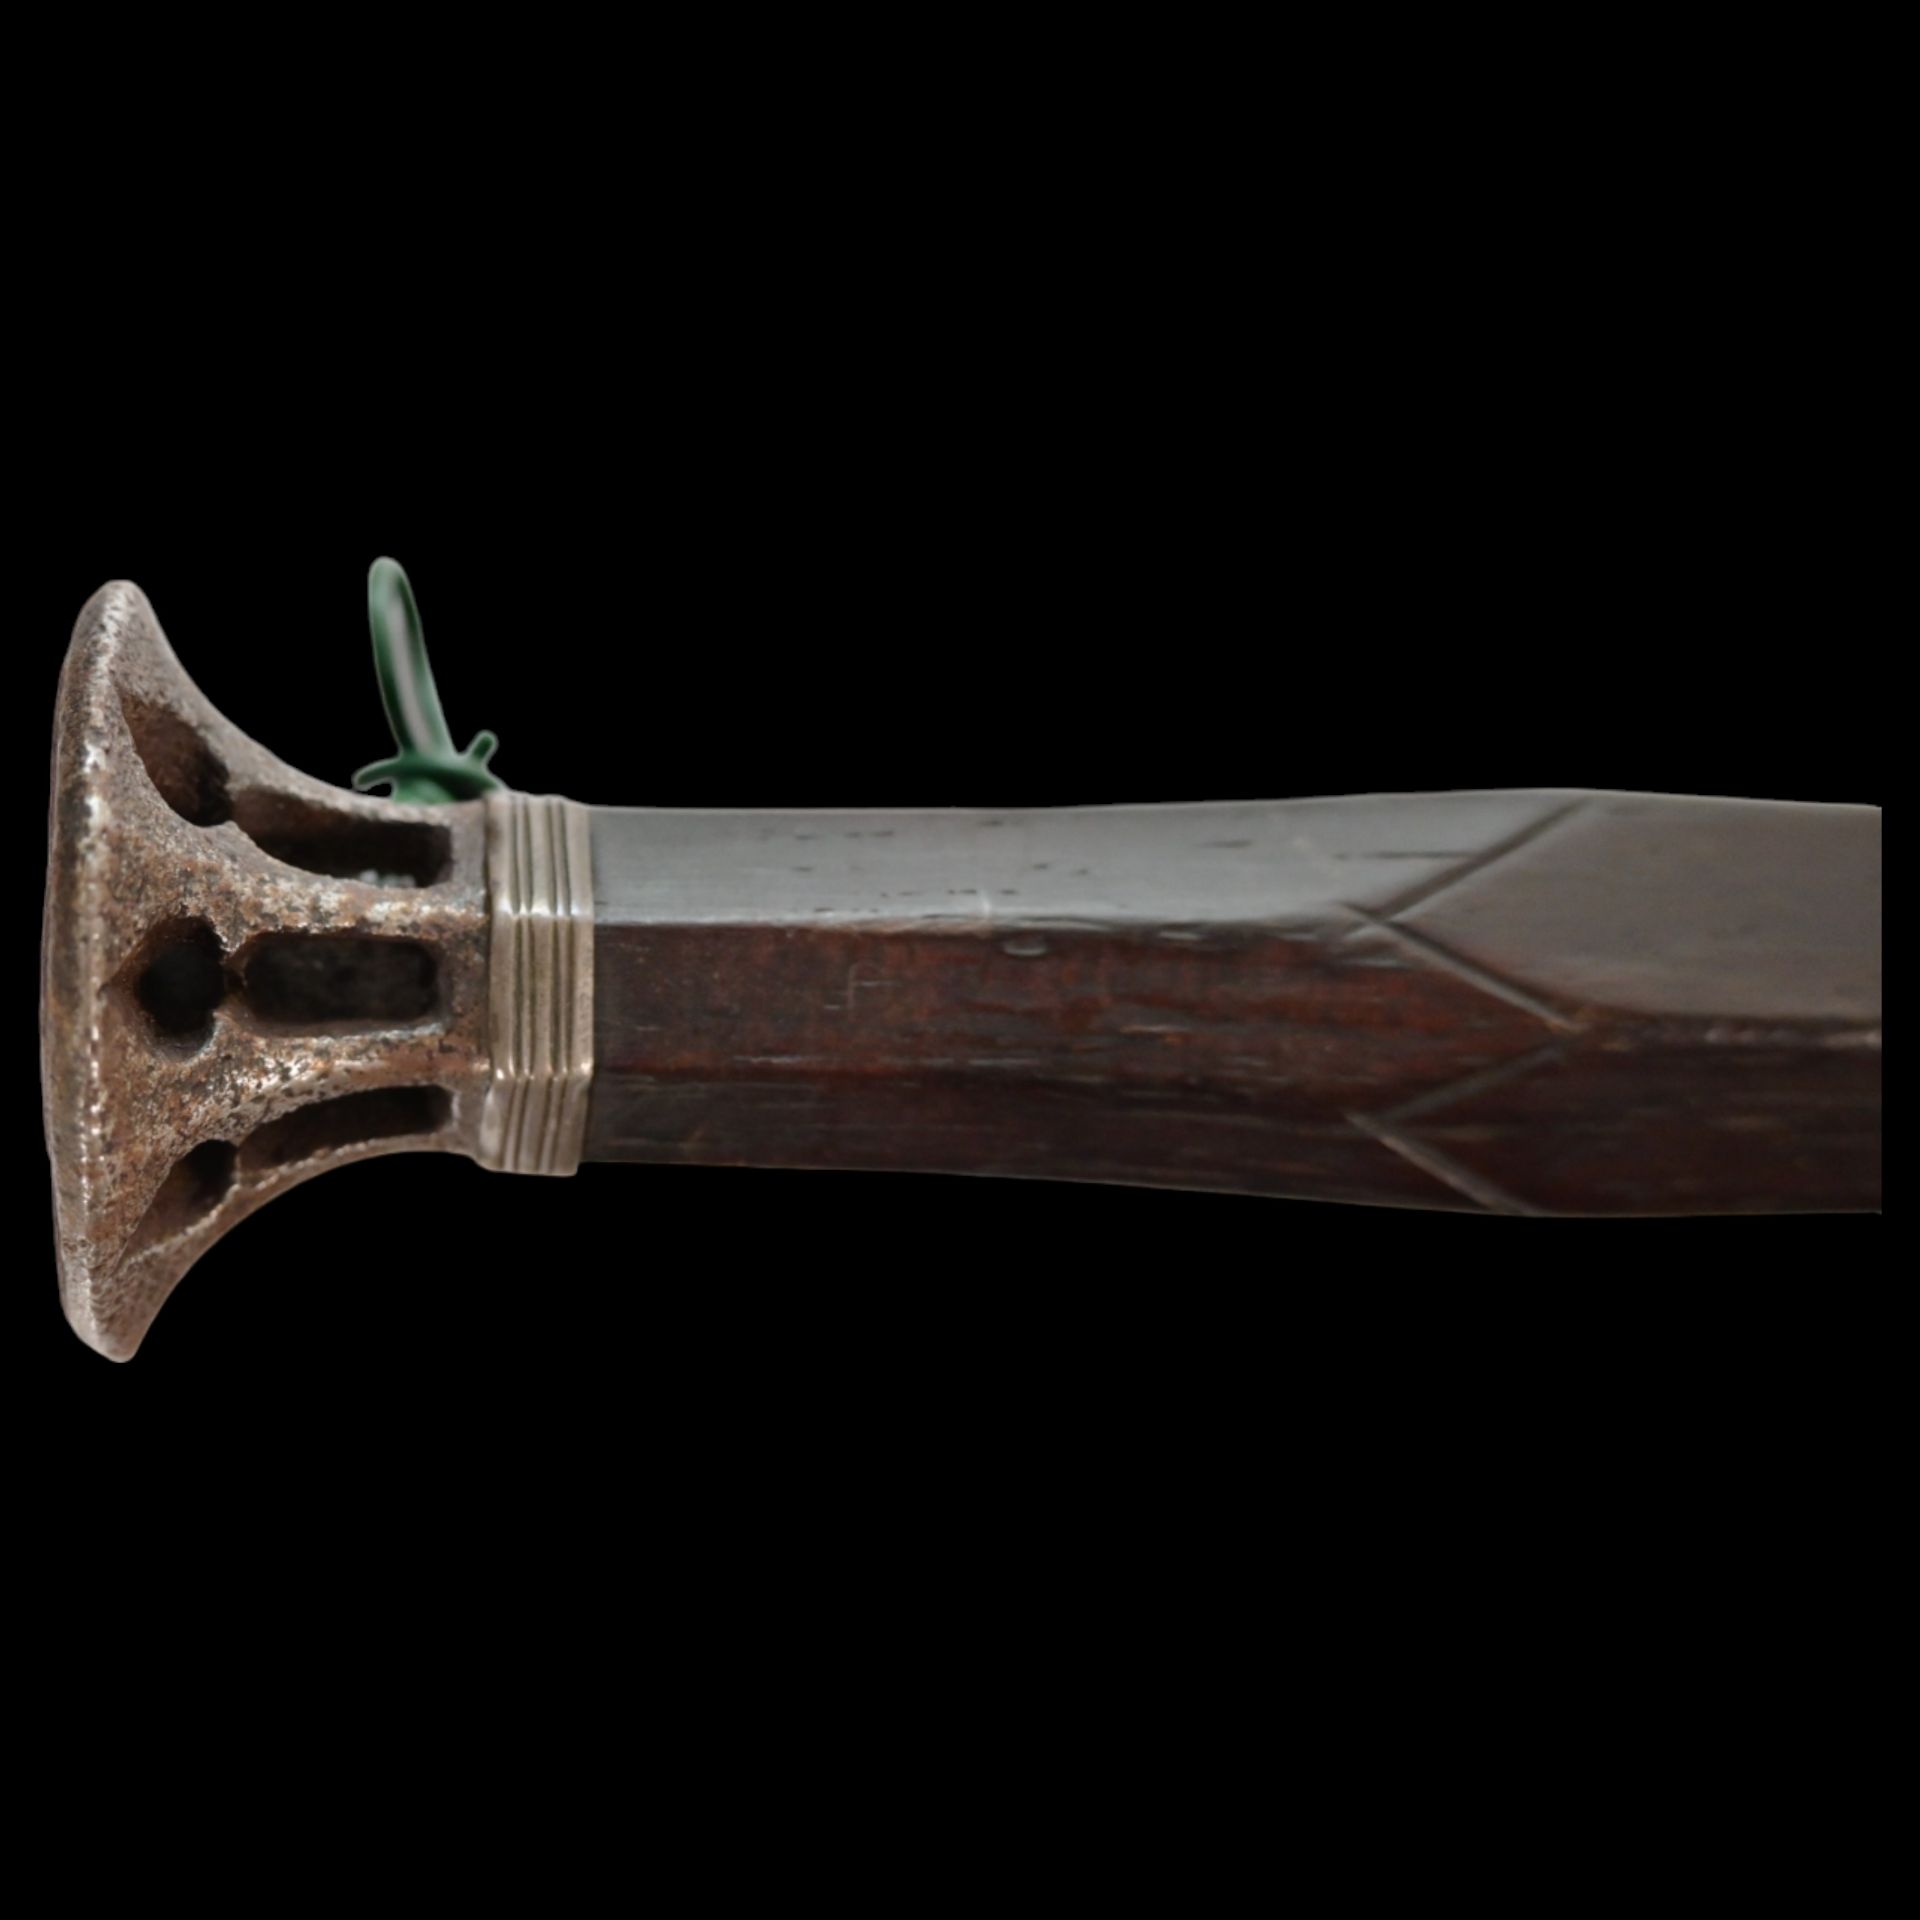 Very rare medieval dagger in excellent condition, France, 15th-16th century. - Image 6 of 11